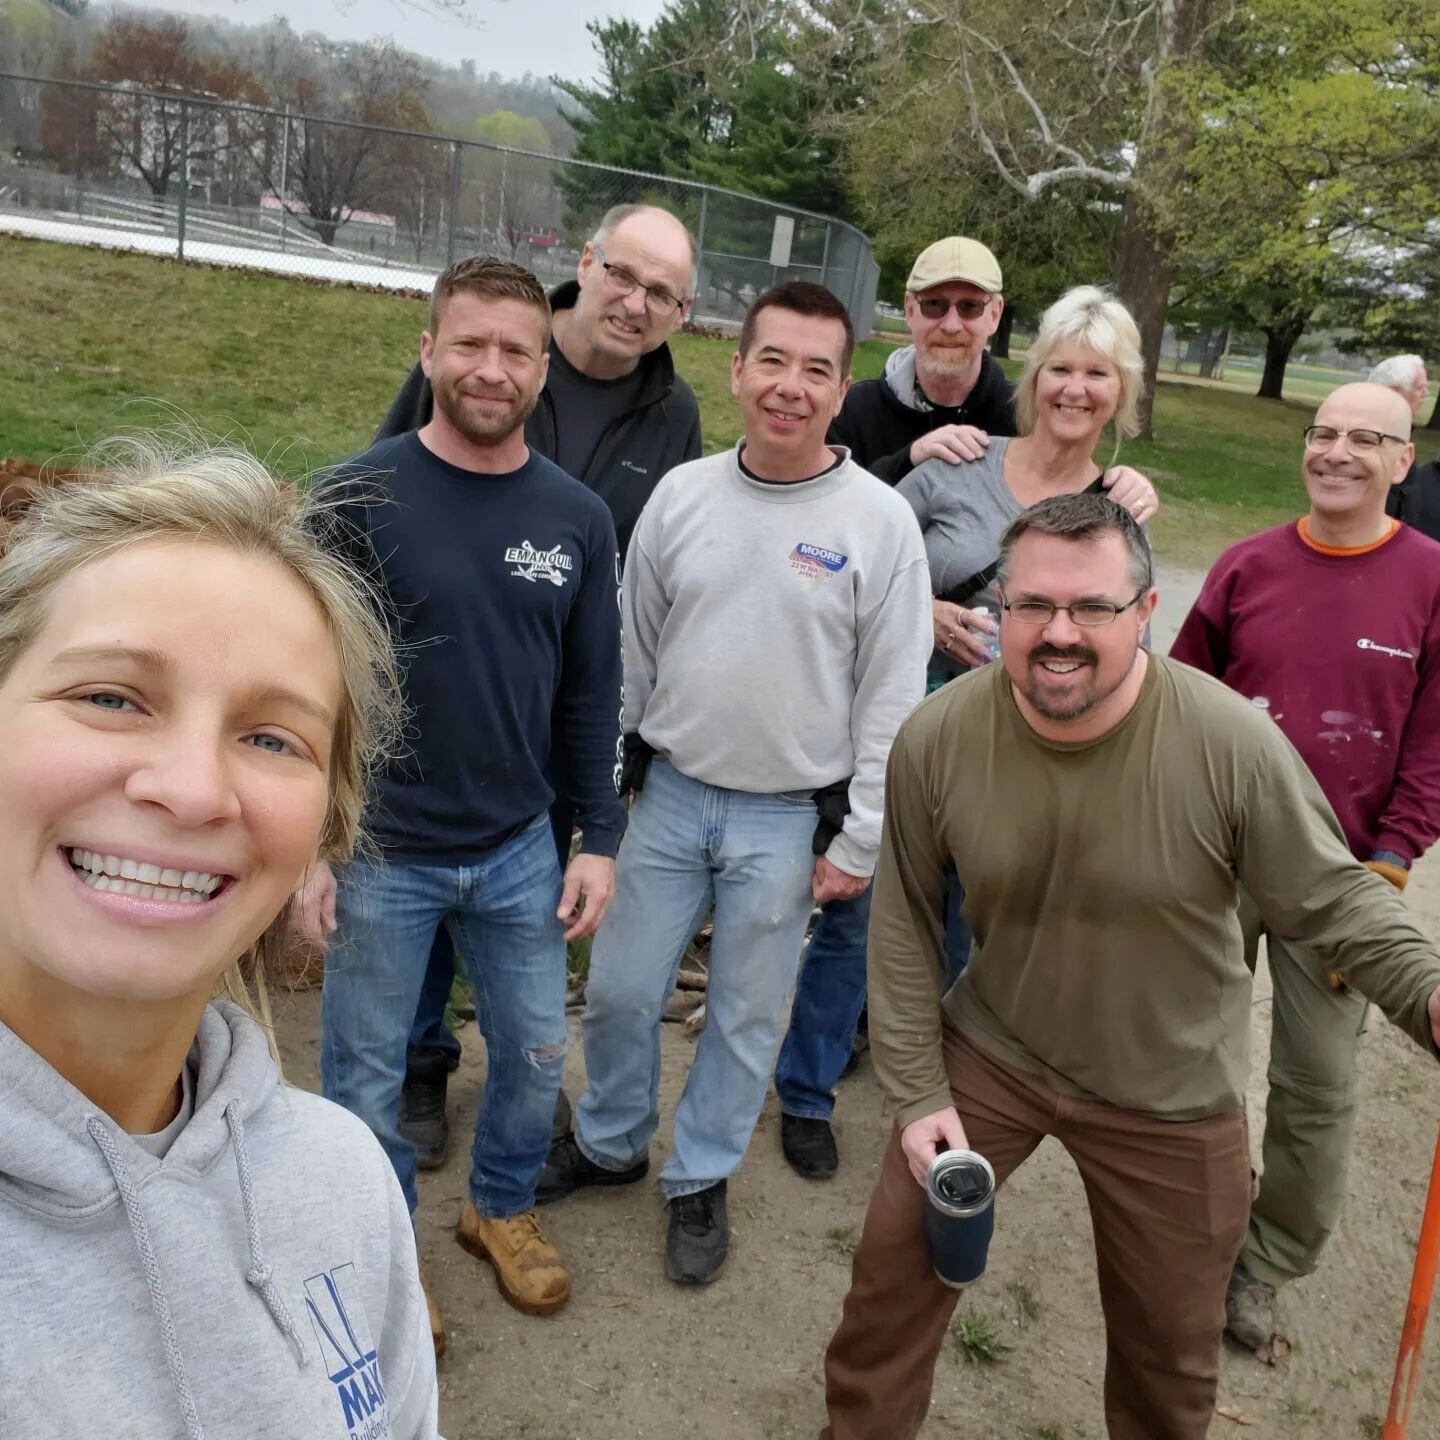 I took very few pictures but we had an amazing Coolidge Park Cleanup - Fitchburg Dog Park Cleanup with Keep Fitchburg Beautiful &amp; Fitchburg Dog Park volunteers. 
At least 12 volunteers joined us and picked up 7 bags of litter and 30 bags of leave